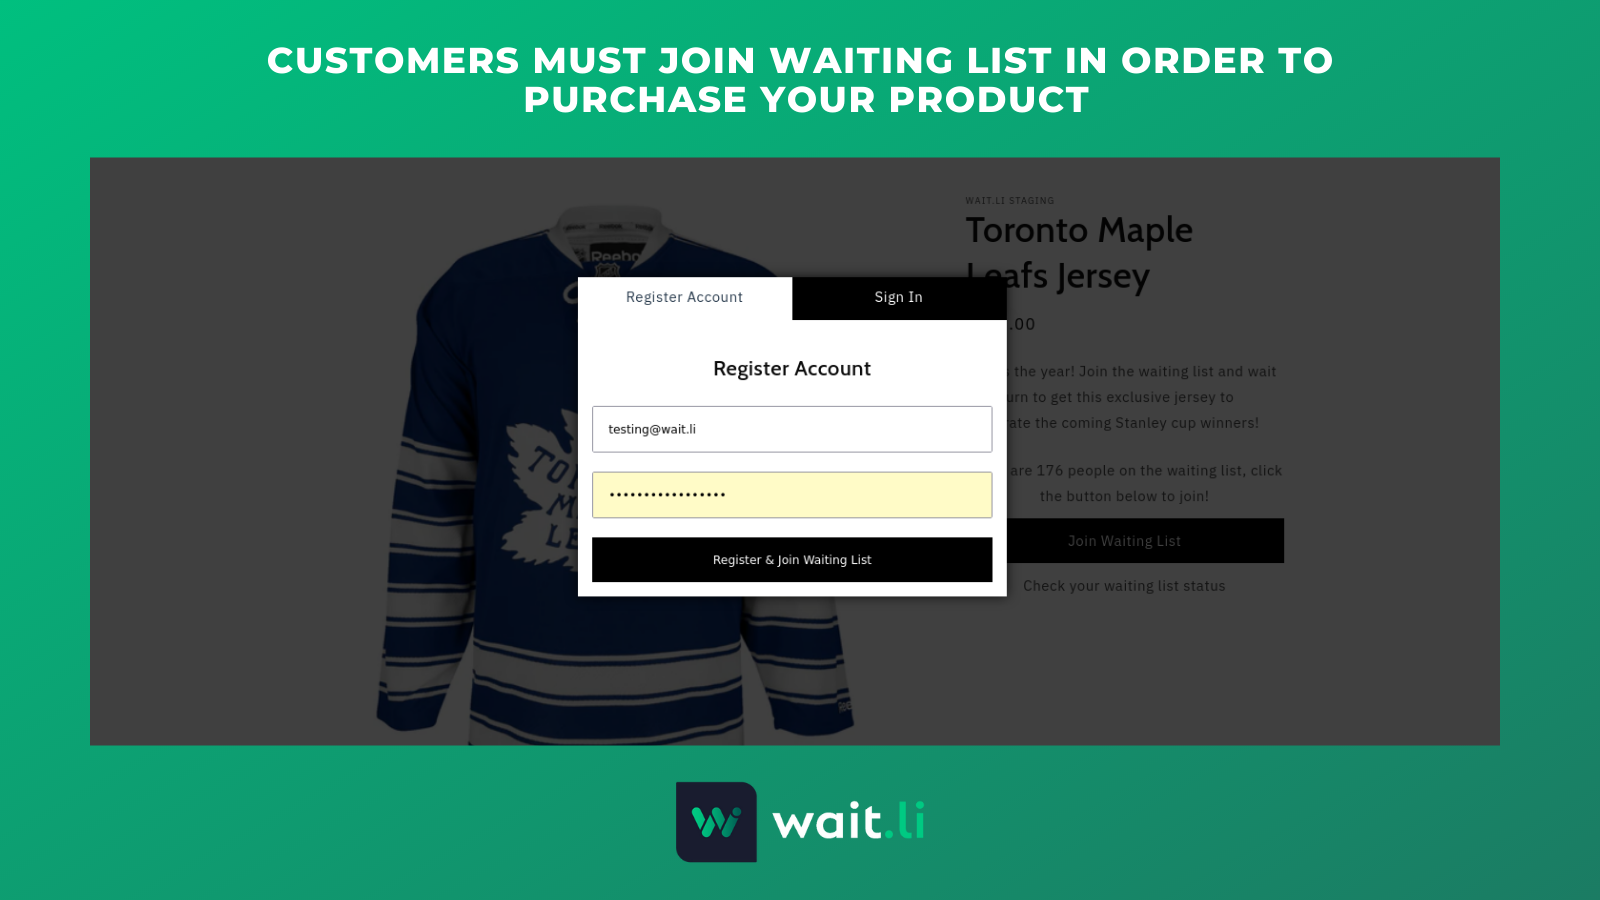 Customers must join a waiting list before purchasing a product